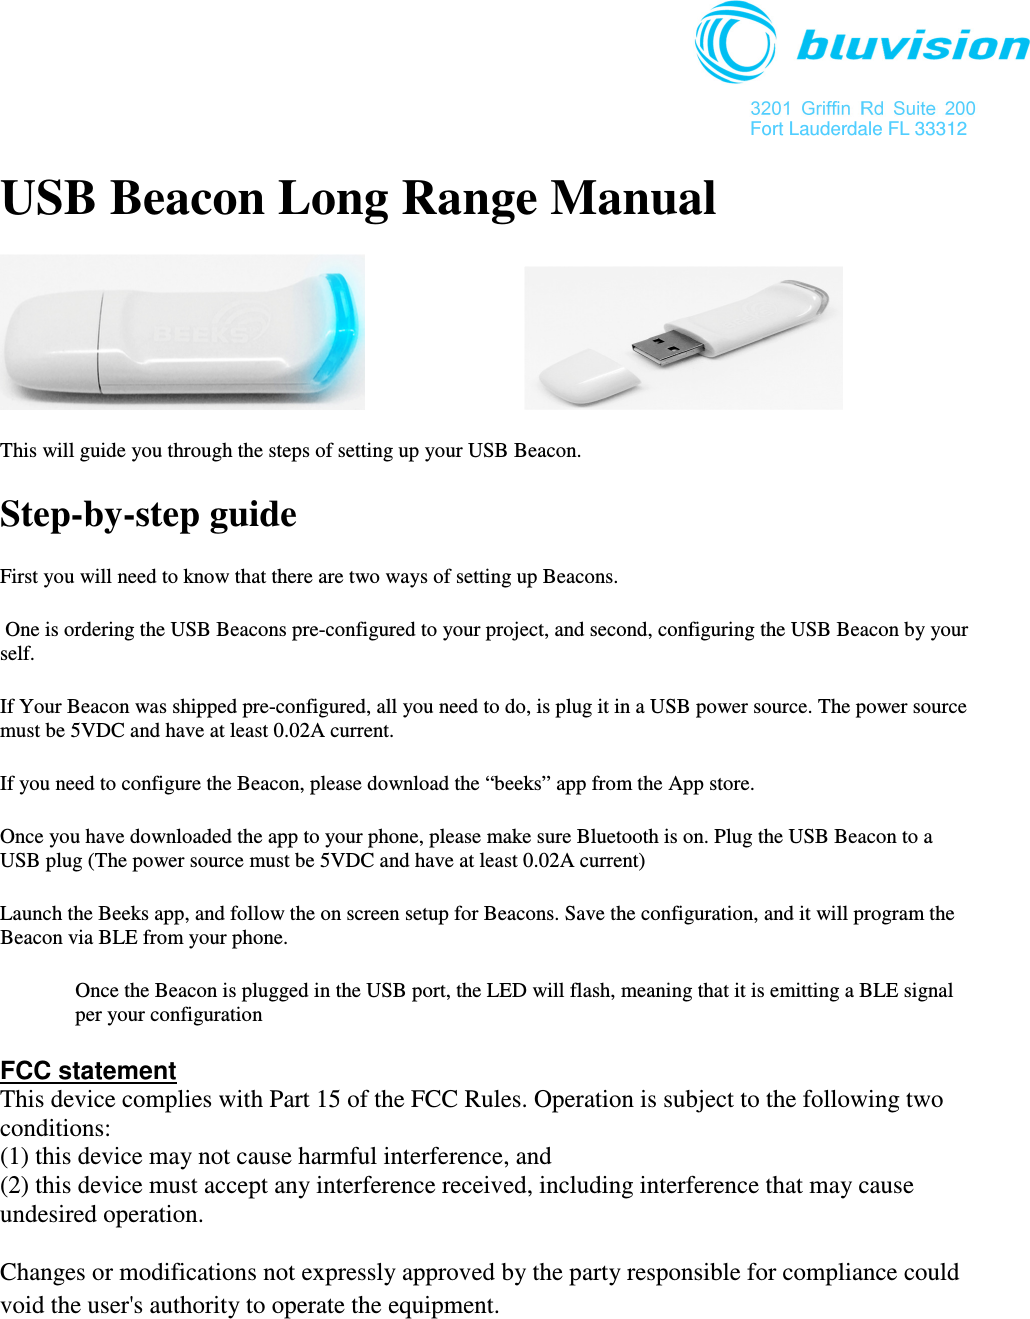  3201  Griffin  Rd  Suite  200 Fort Lauderdale FL 33312 USB Beacon Long Range Manual            This will guide you through the steps of setting up your USB Beacon. Step-by-step guide First you will need to know that there are two ways of setting up Beacons.  One is ordering the USB Beacons pre-configured to your project, and second, configuring the USB Beacon by your self. If Your Beacon was shipped pre-configured, all you need to do, is plug it in a USB power source. The power source must be 5VDC and have at least 0.02A current. If you need to configure the Beacon, please download the “beeks” app from the App store. Once you have downloaded the app to your phone, please make sure Bluetooth is on. Plug the USB Beacon to a USB plug (The power source must be 5VDC and have at least 0.02A current) Launch the Beeks app, and follow the on screen setup for Beacons. Save the configuration, and it will program the Beacon via BLE from your phone. Once the Beacon is plugged in the USB port, the LED will flash, meaning that it is emitting a BLE signal per your configuration FCC statement This device complies with Part 15 of the FCC Rules. Operation is subject to the following two conditions:  (1) this device may not cause harmful interference, and (2) this device must accept any interference received, including interference that may cause undesired operation.  Changes or modifications not expressly approved by the party responsible for compliance could void the user&apos;s authority to operate the equipment.   